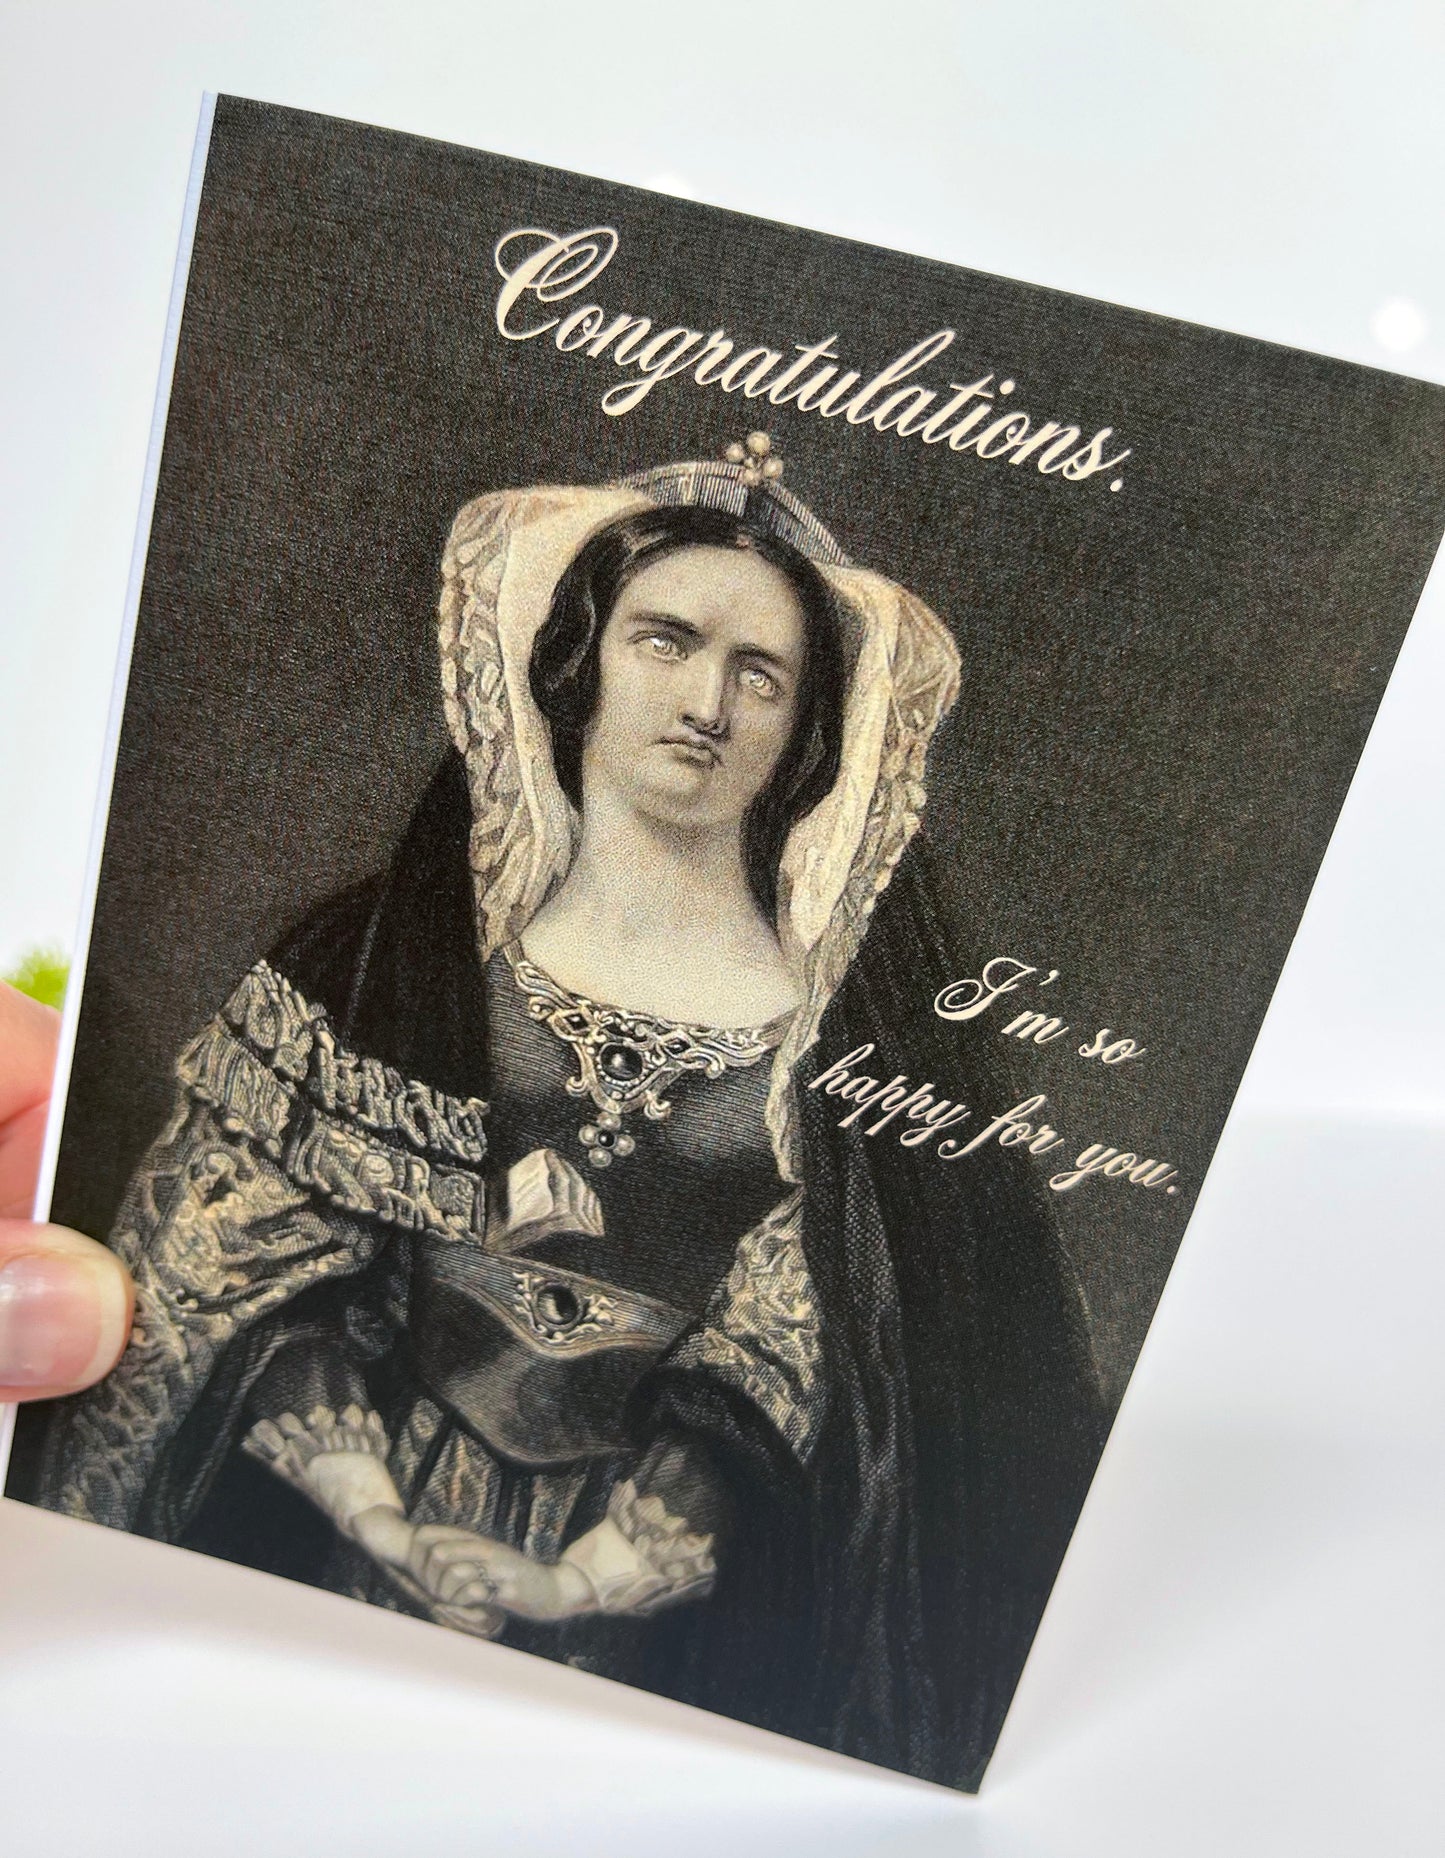 all occasion blank greeting note card sepia tone victorian woman funny card for graduation congratulations congrats promotion new baby engagement wedding moving goodbye silly resting bitch face queen hilarious snarky coin laundry